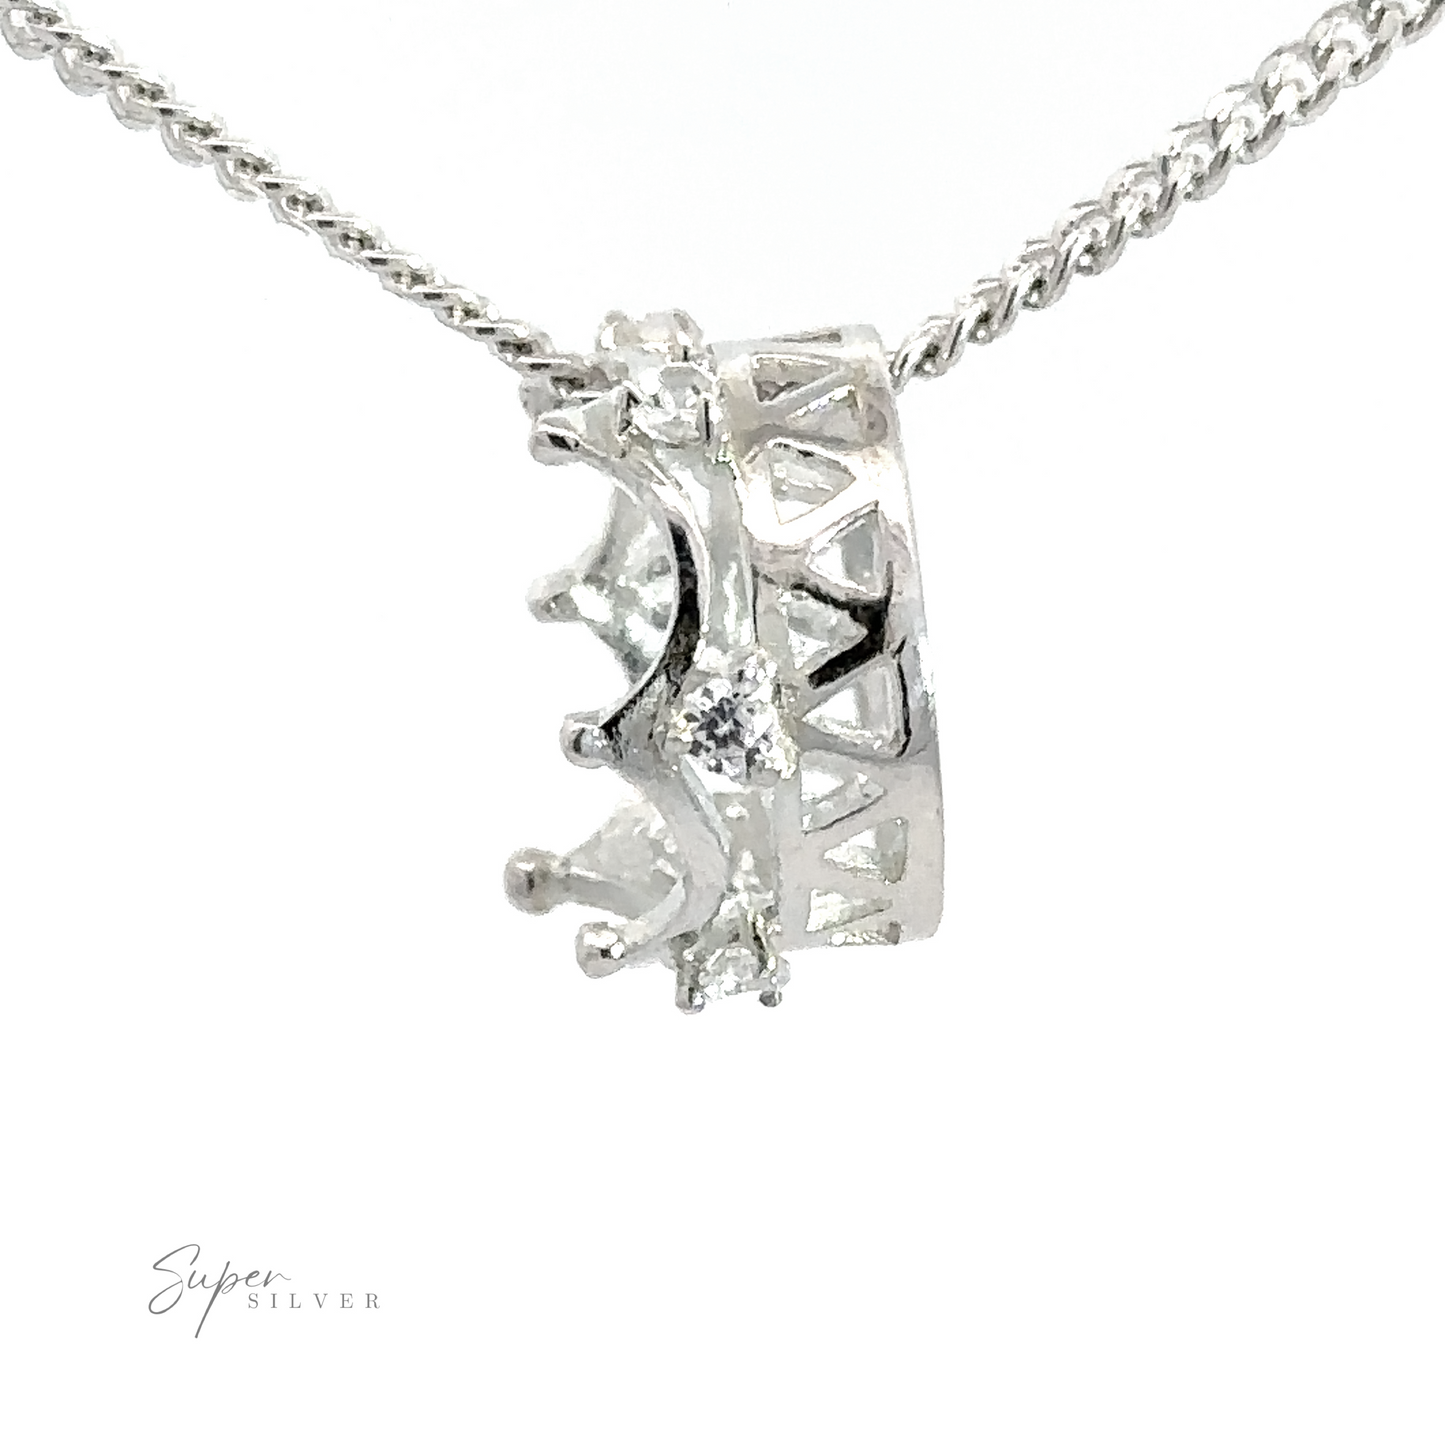 
                  
                    Cubic Zirconia Crown Pendant with a Cubic Zirconia gemstone, hanging on a twisted sterling silver chain. The design features small triangular cutouts. "Super Silver" logo is visible in the lower left corner.
                  
                